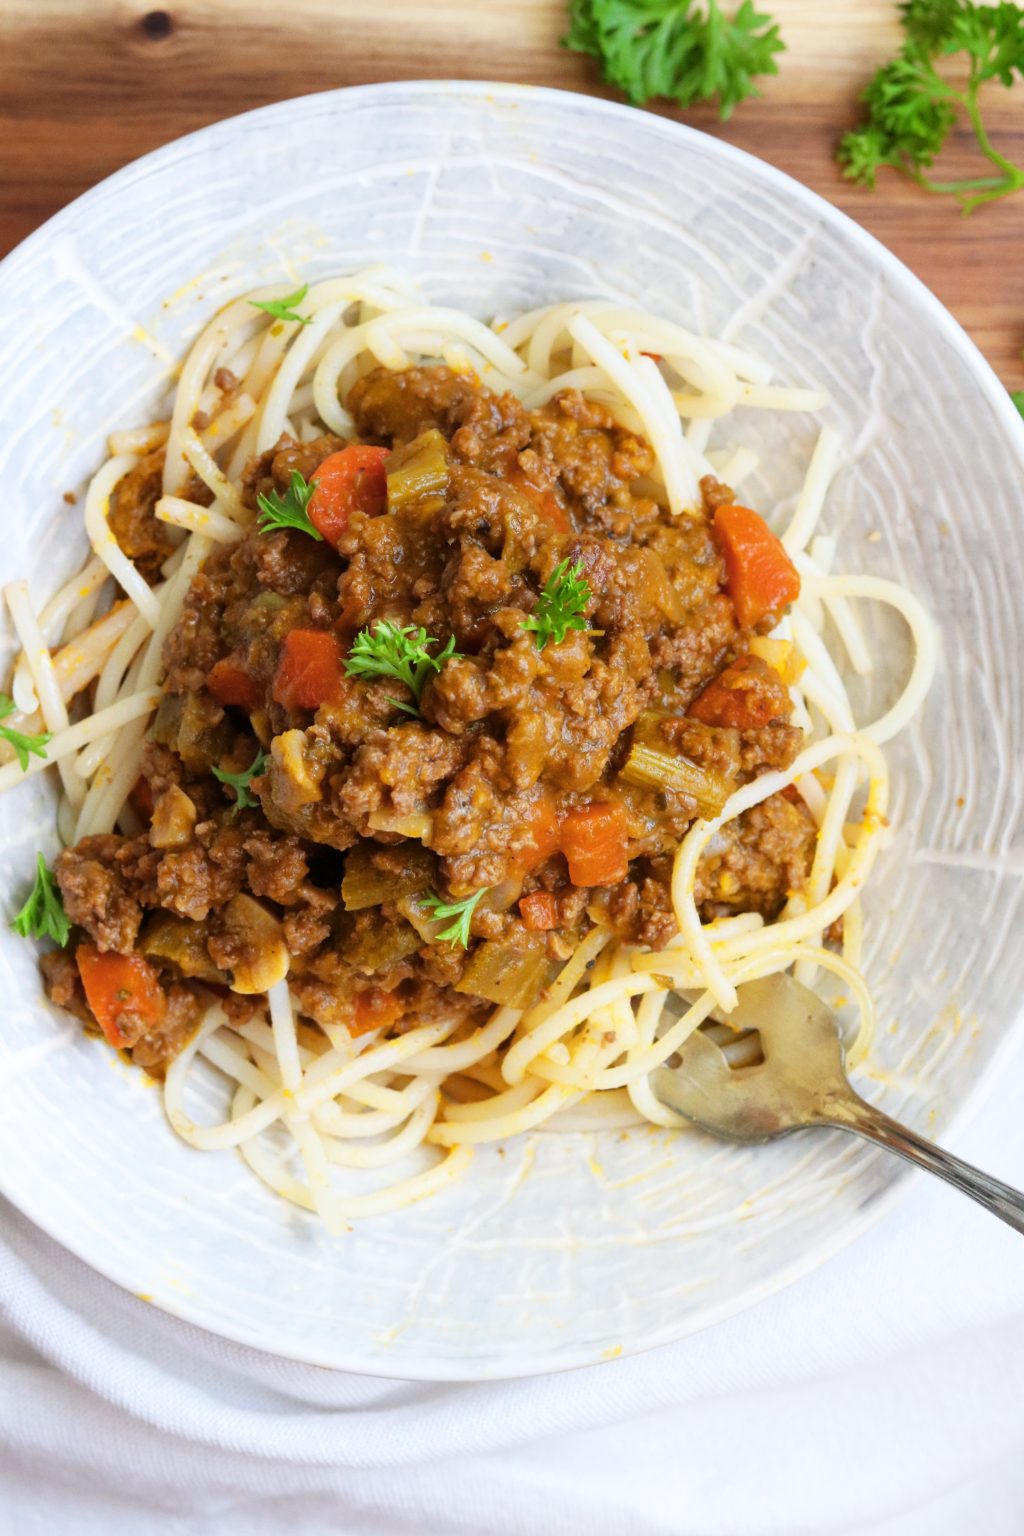 Nightshade-Free Bolognese Sauce - Grazed & Enthused